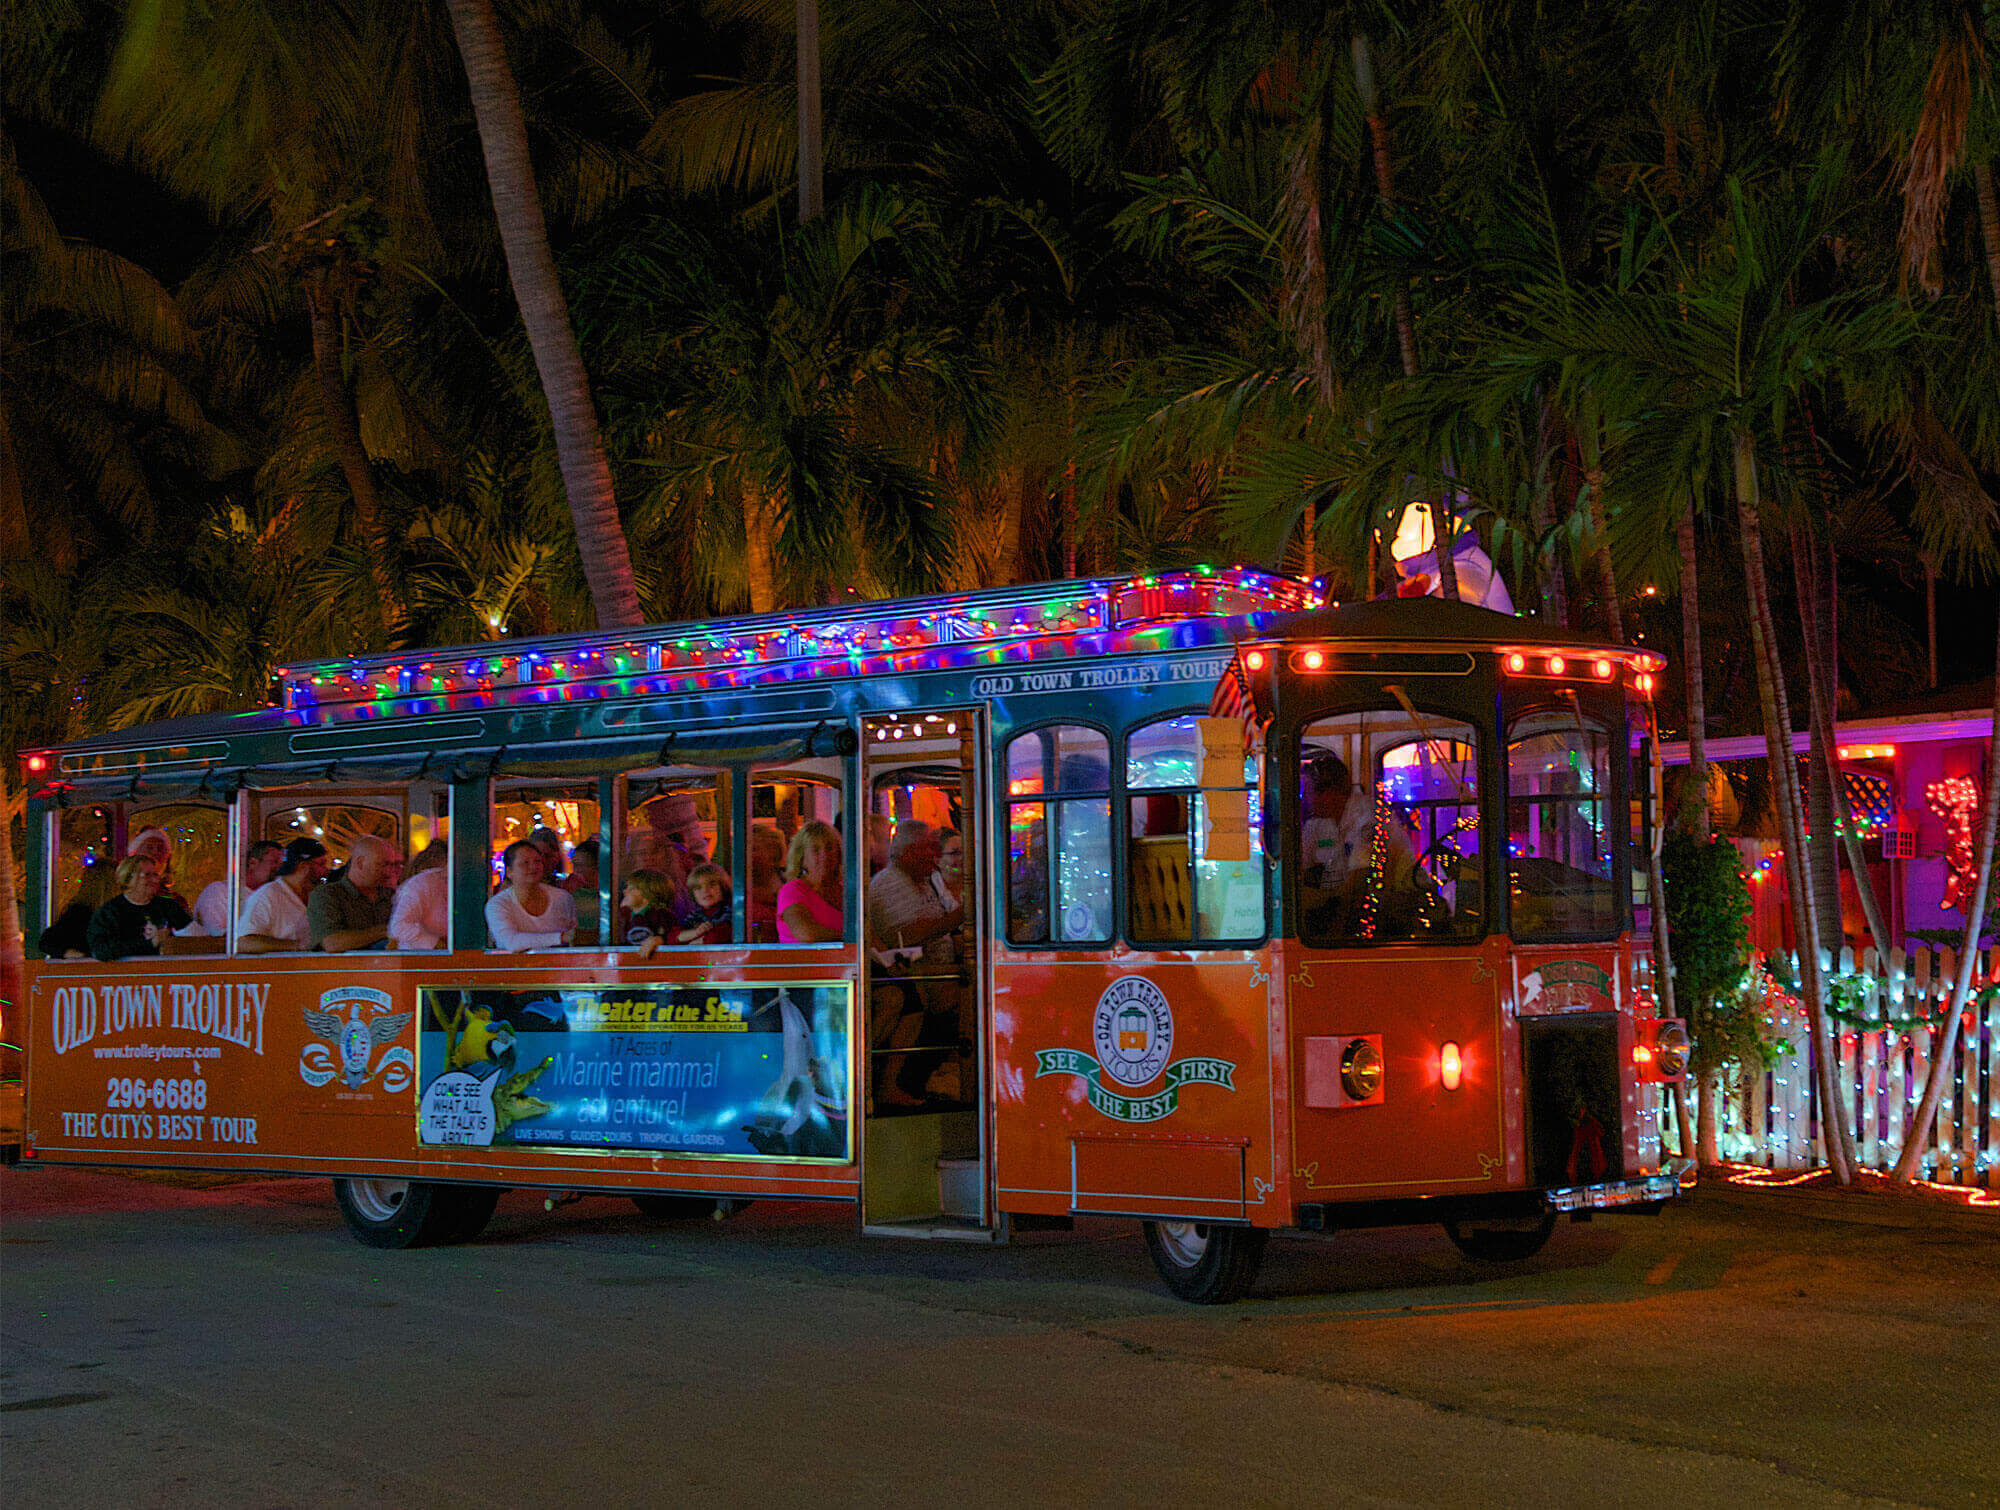 An Old Town Trolley decorated in lights on a Holiday Sights & Festive Nights Tour in Key West, FL